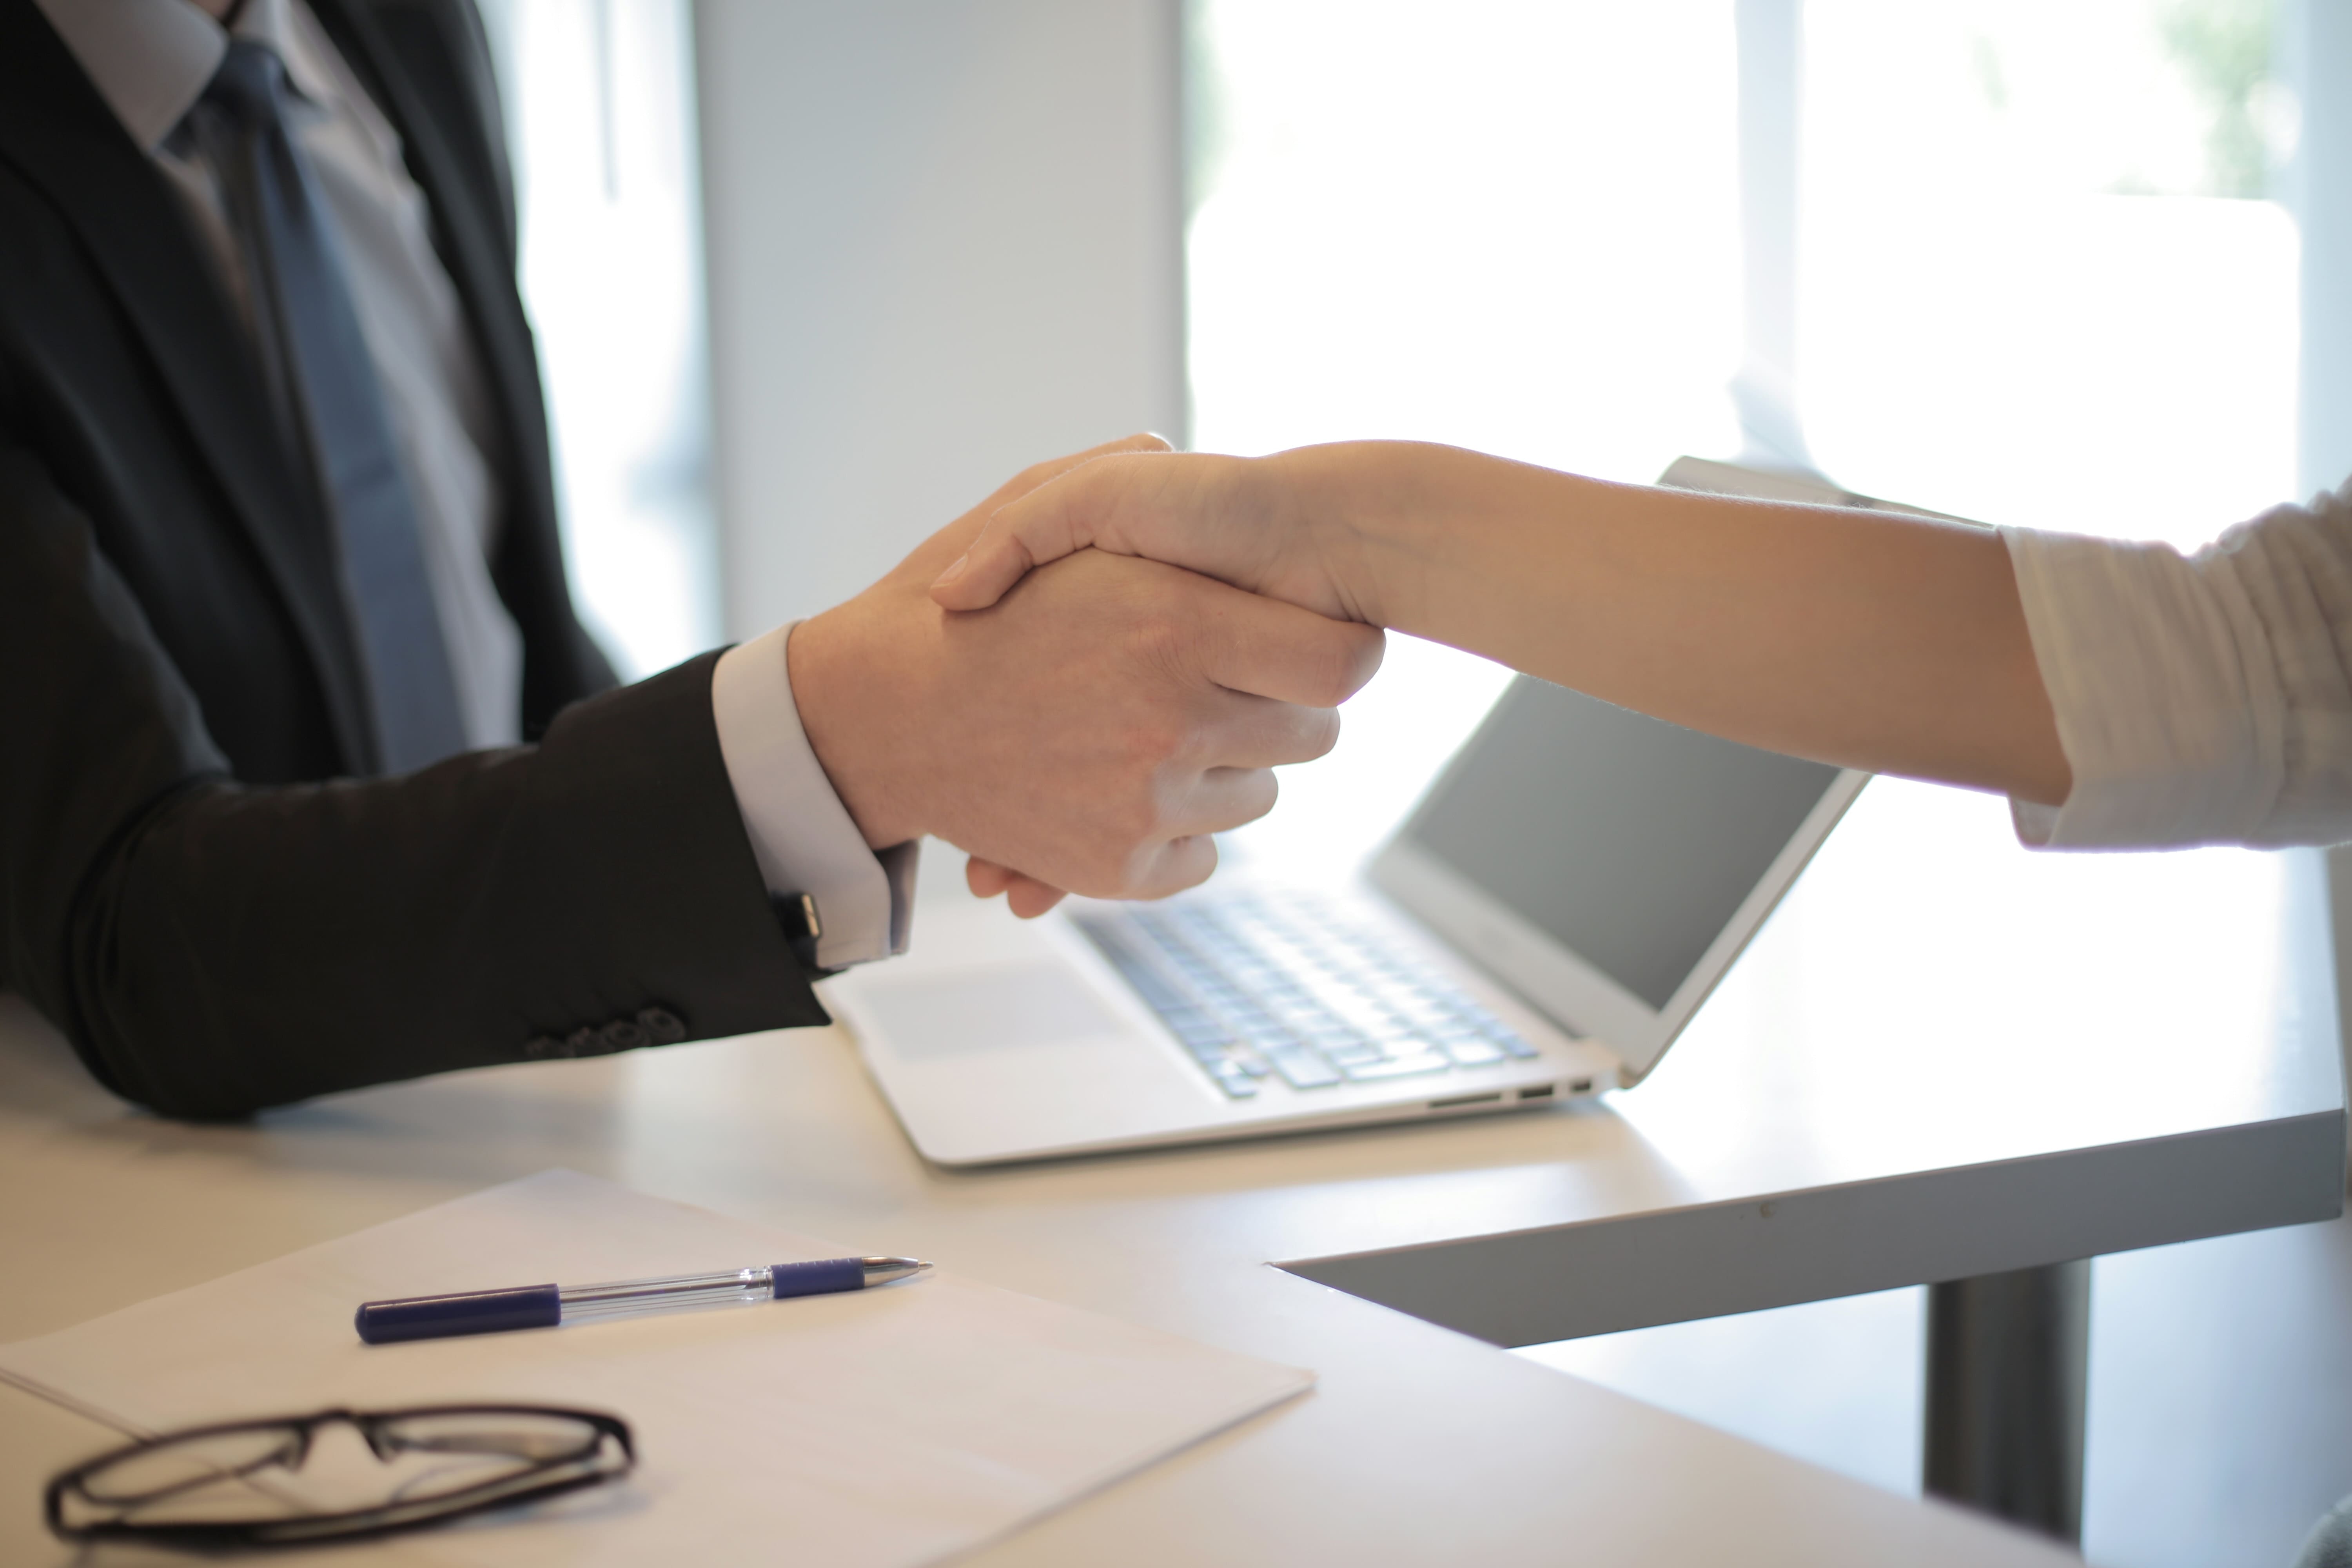 two people shaking hands at an office desk